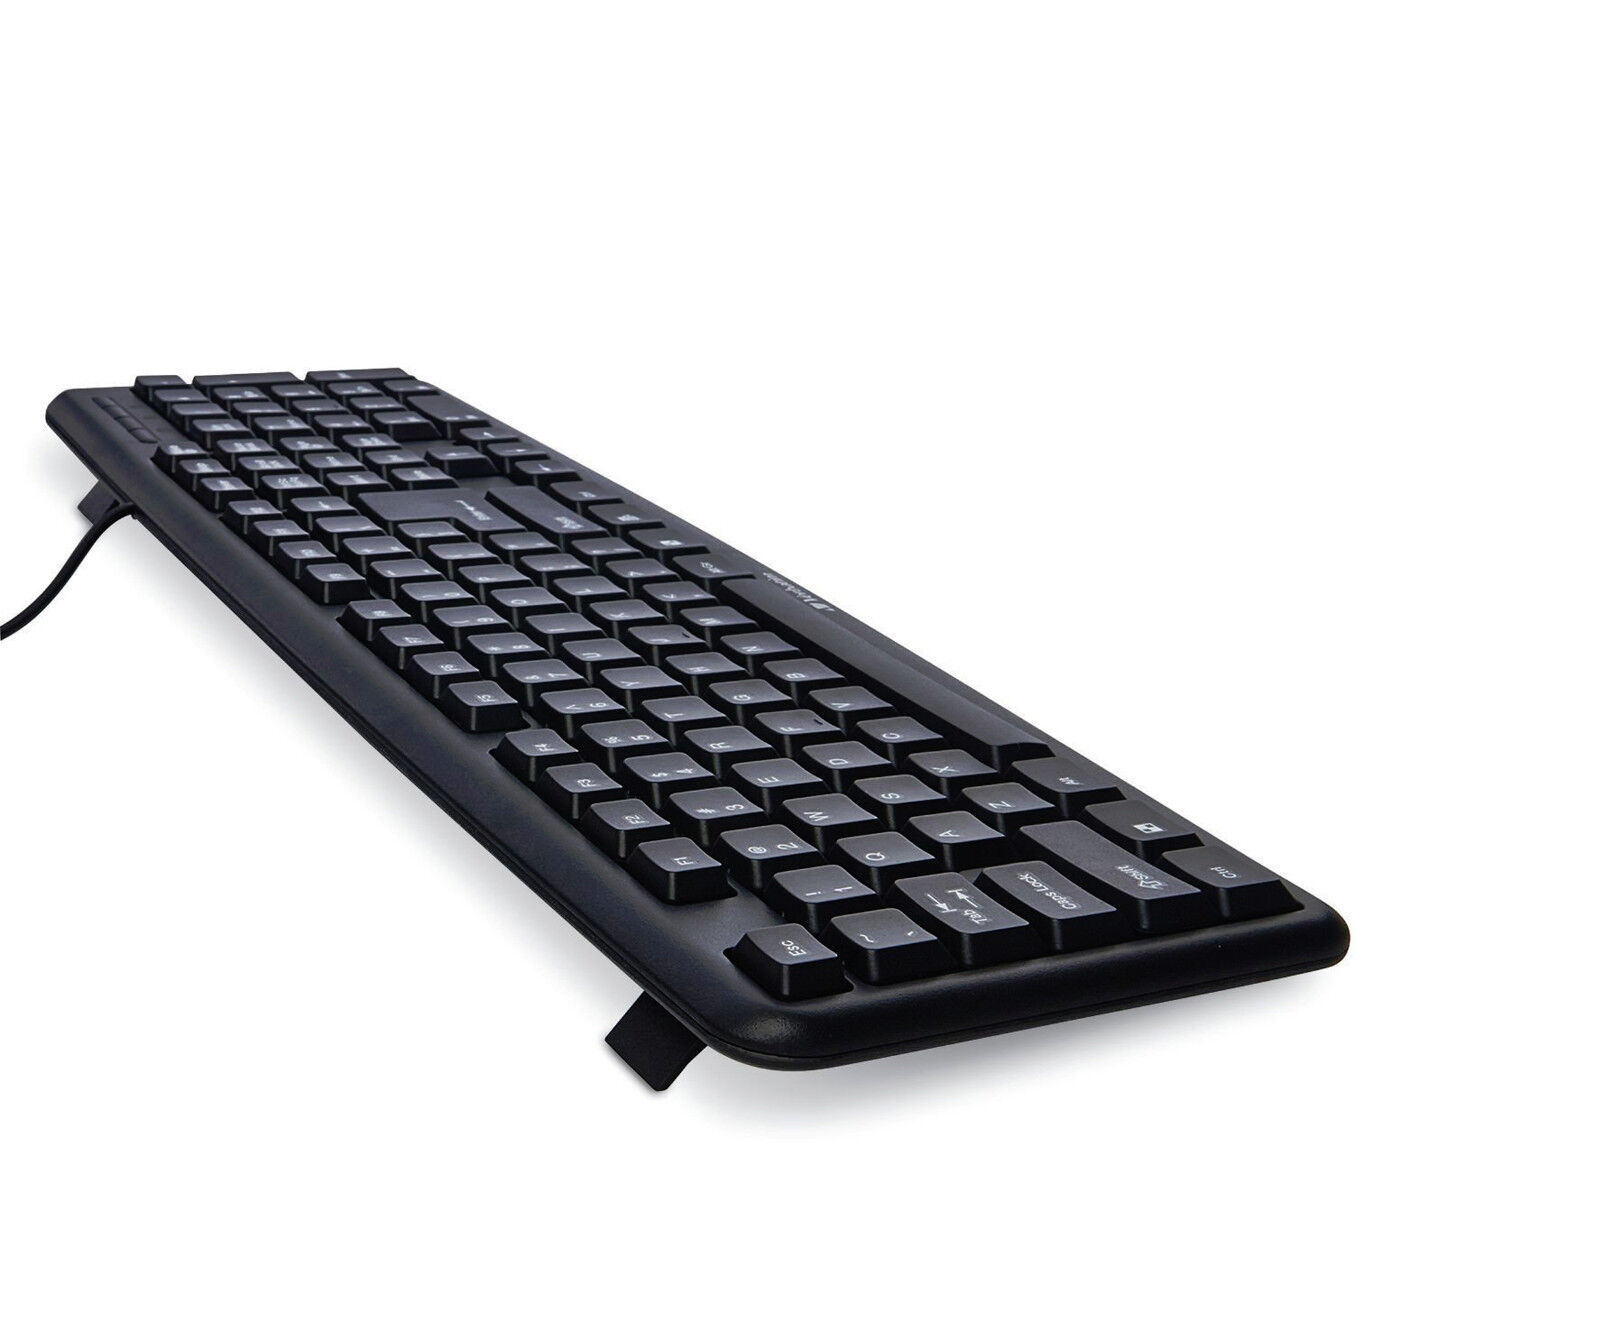 Comfortable Quiet Wired USB Full Size Corded Keyboard for PC/MAC Laptop Desktop